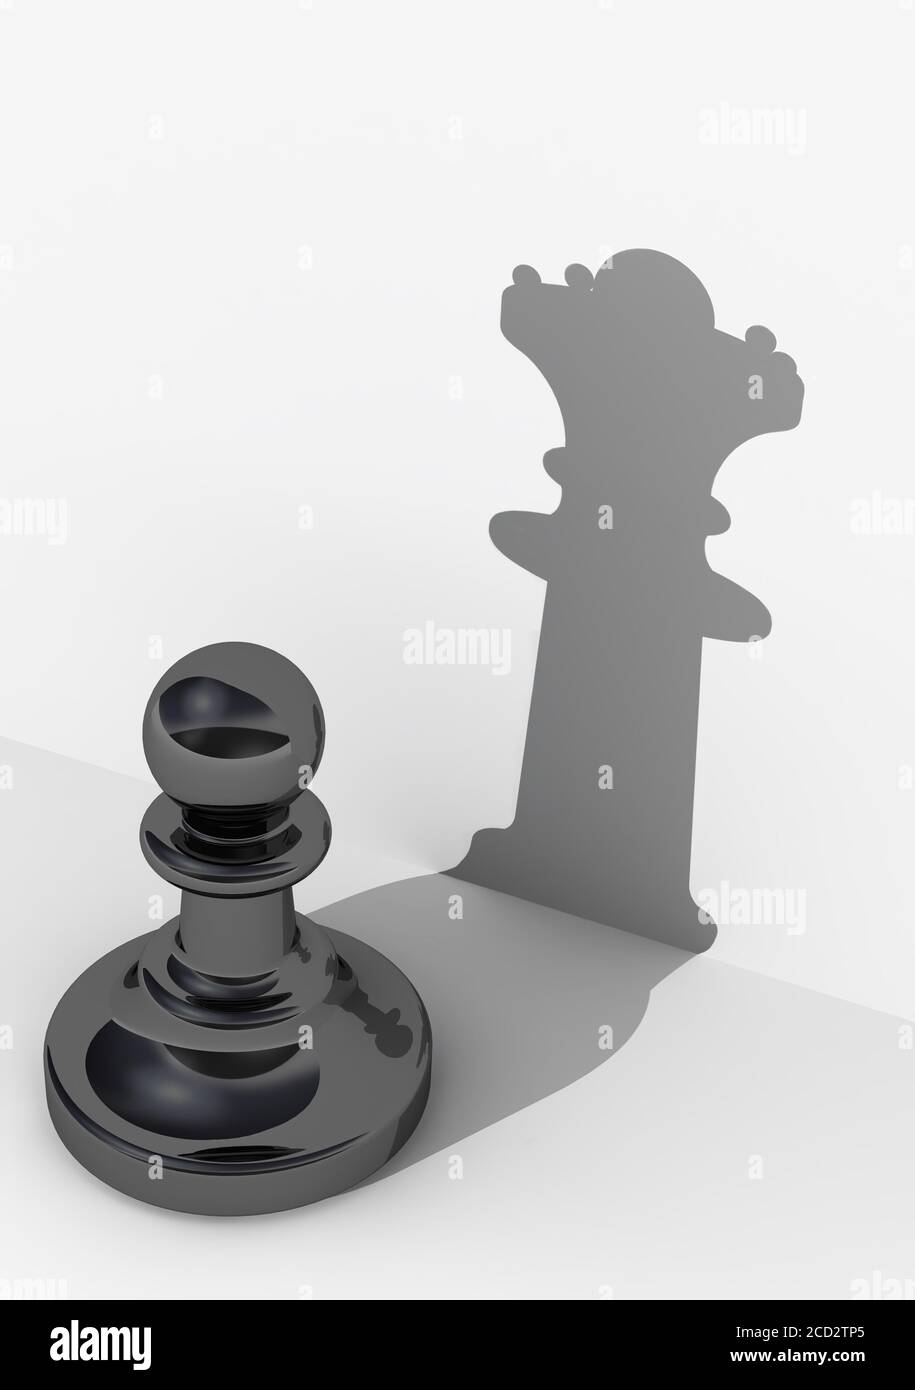 Pawn with high self-esteem. Chess piece. Black pawn with the shadow of queen. The concept of very high self-esteem. 3D illustration. Isolated Stock Photo